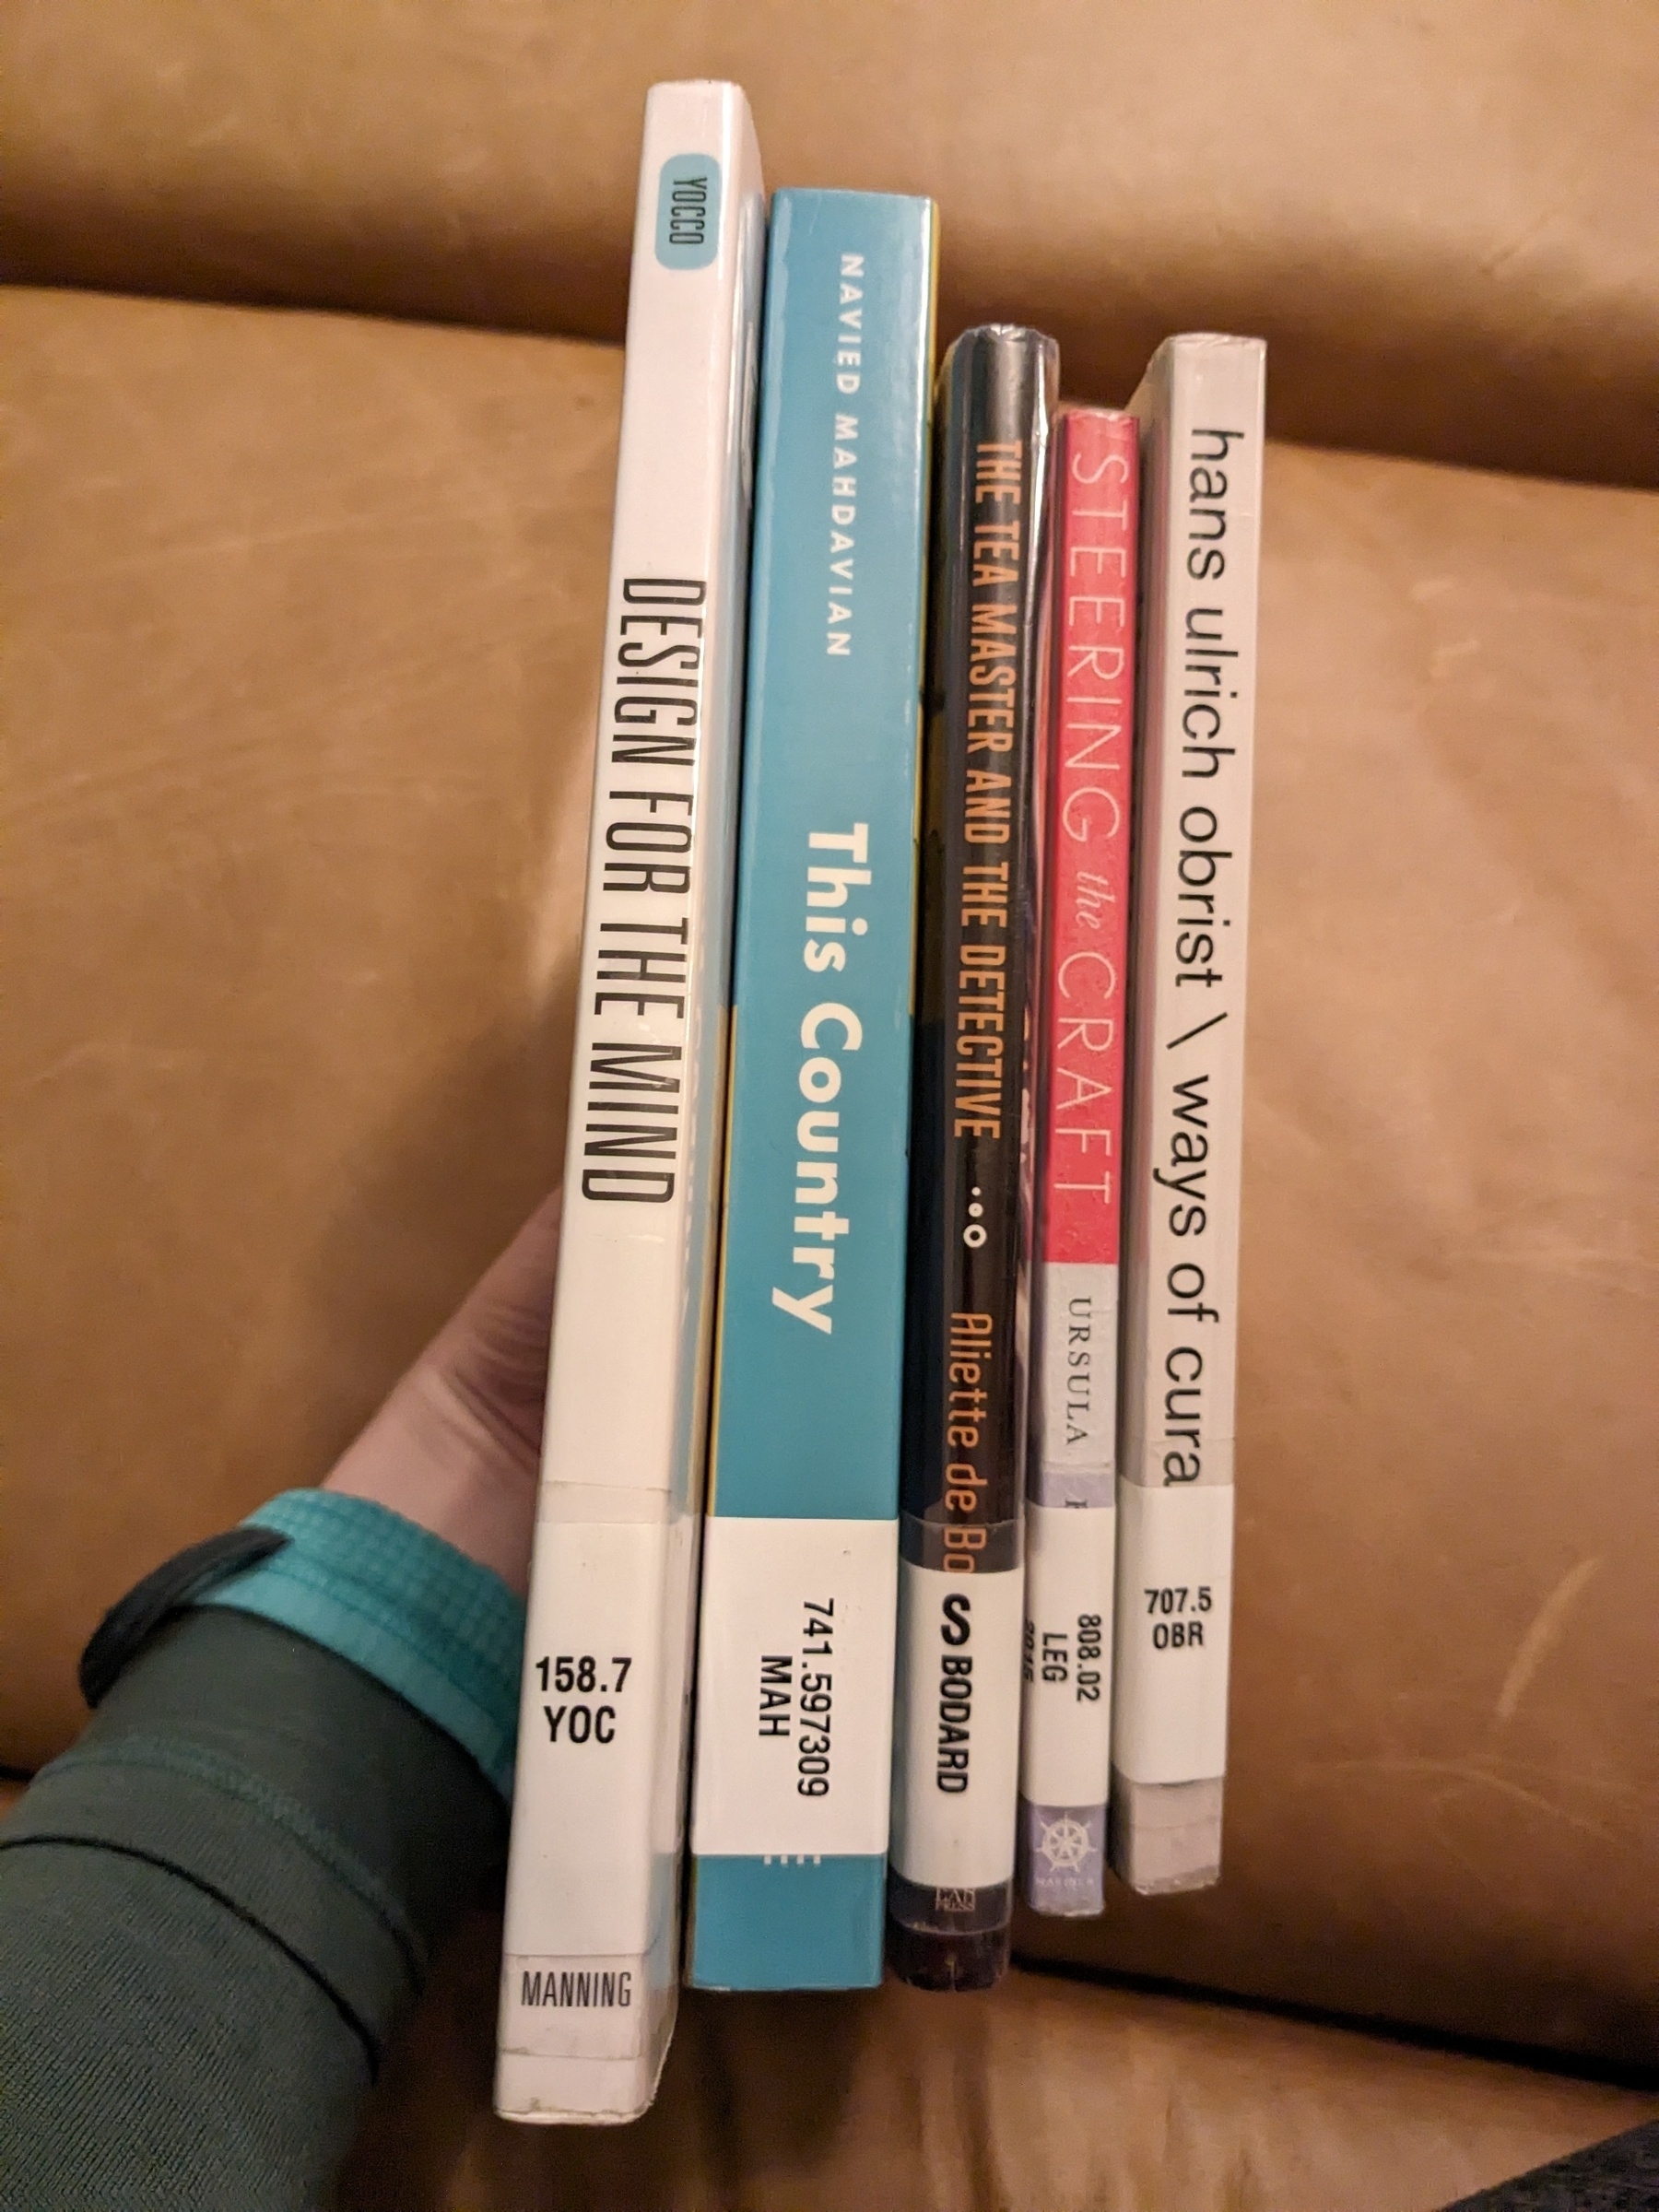 holding five slender library books with spines facing 